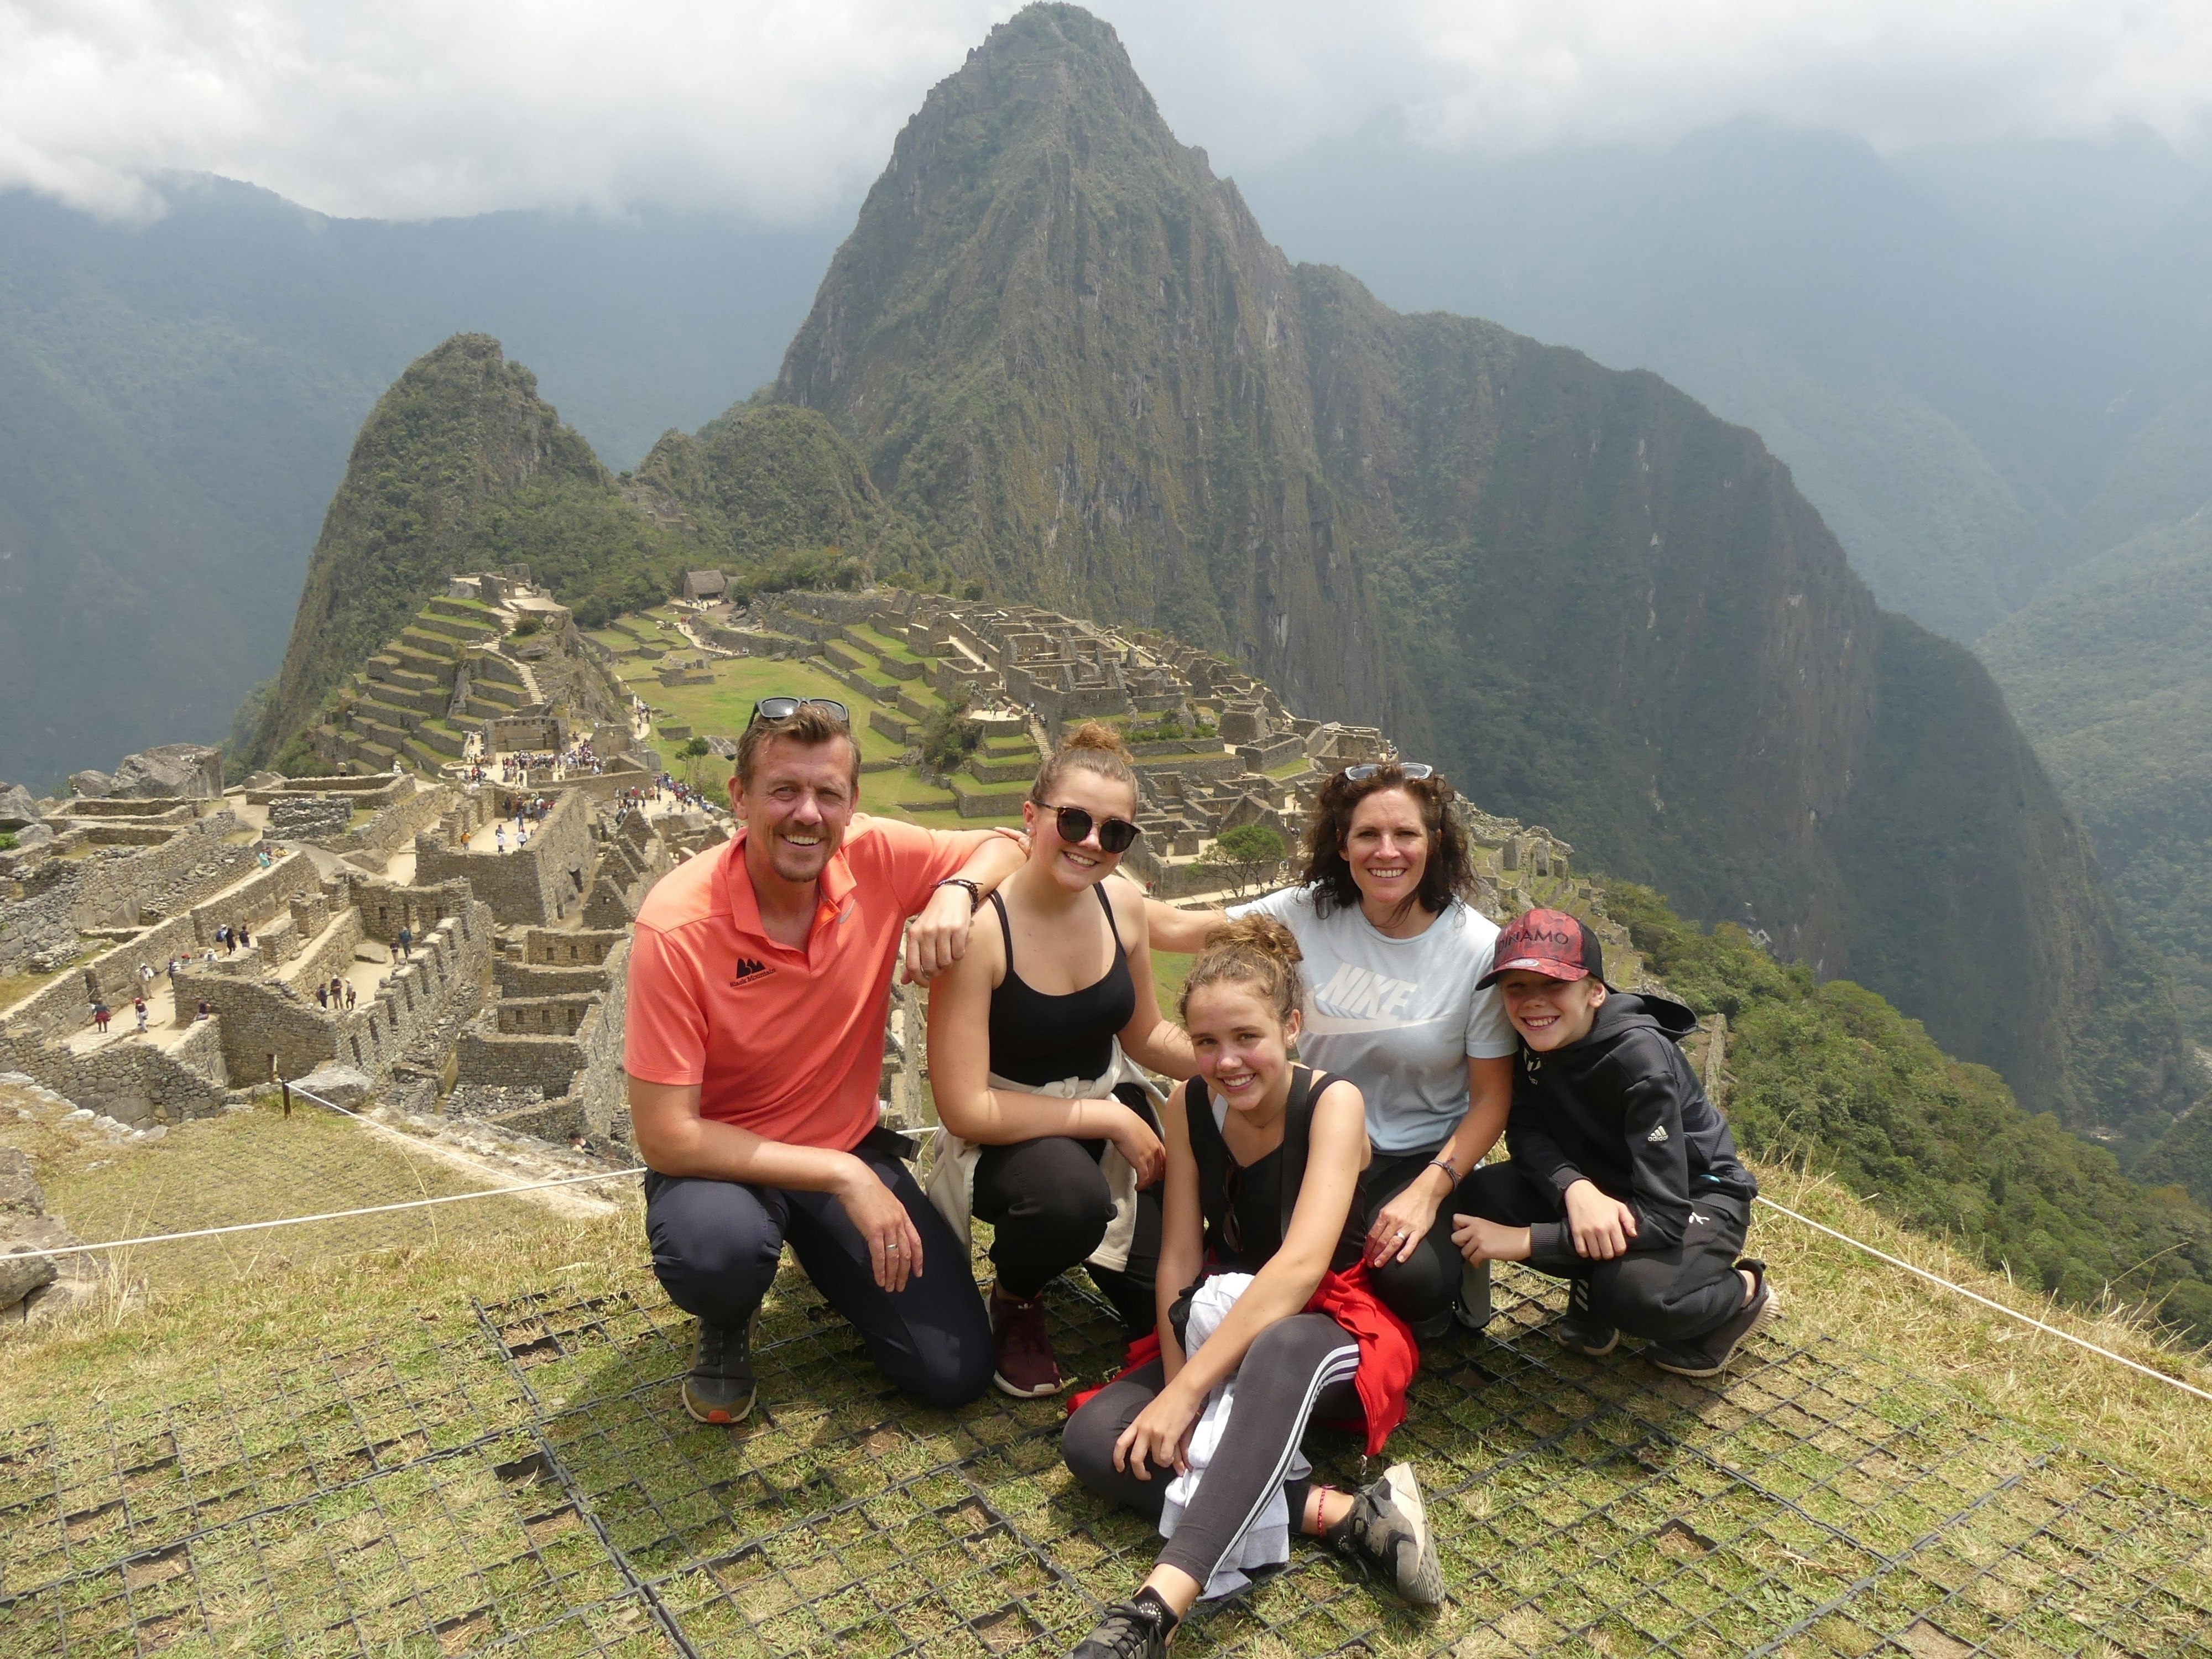 A family poses at the summit of Machu Pichu